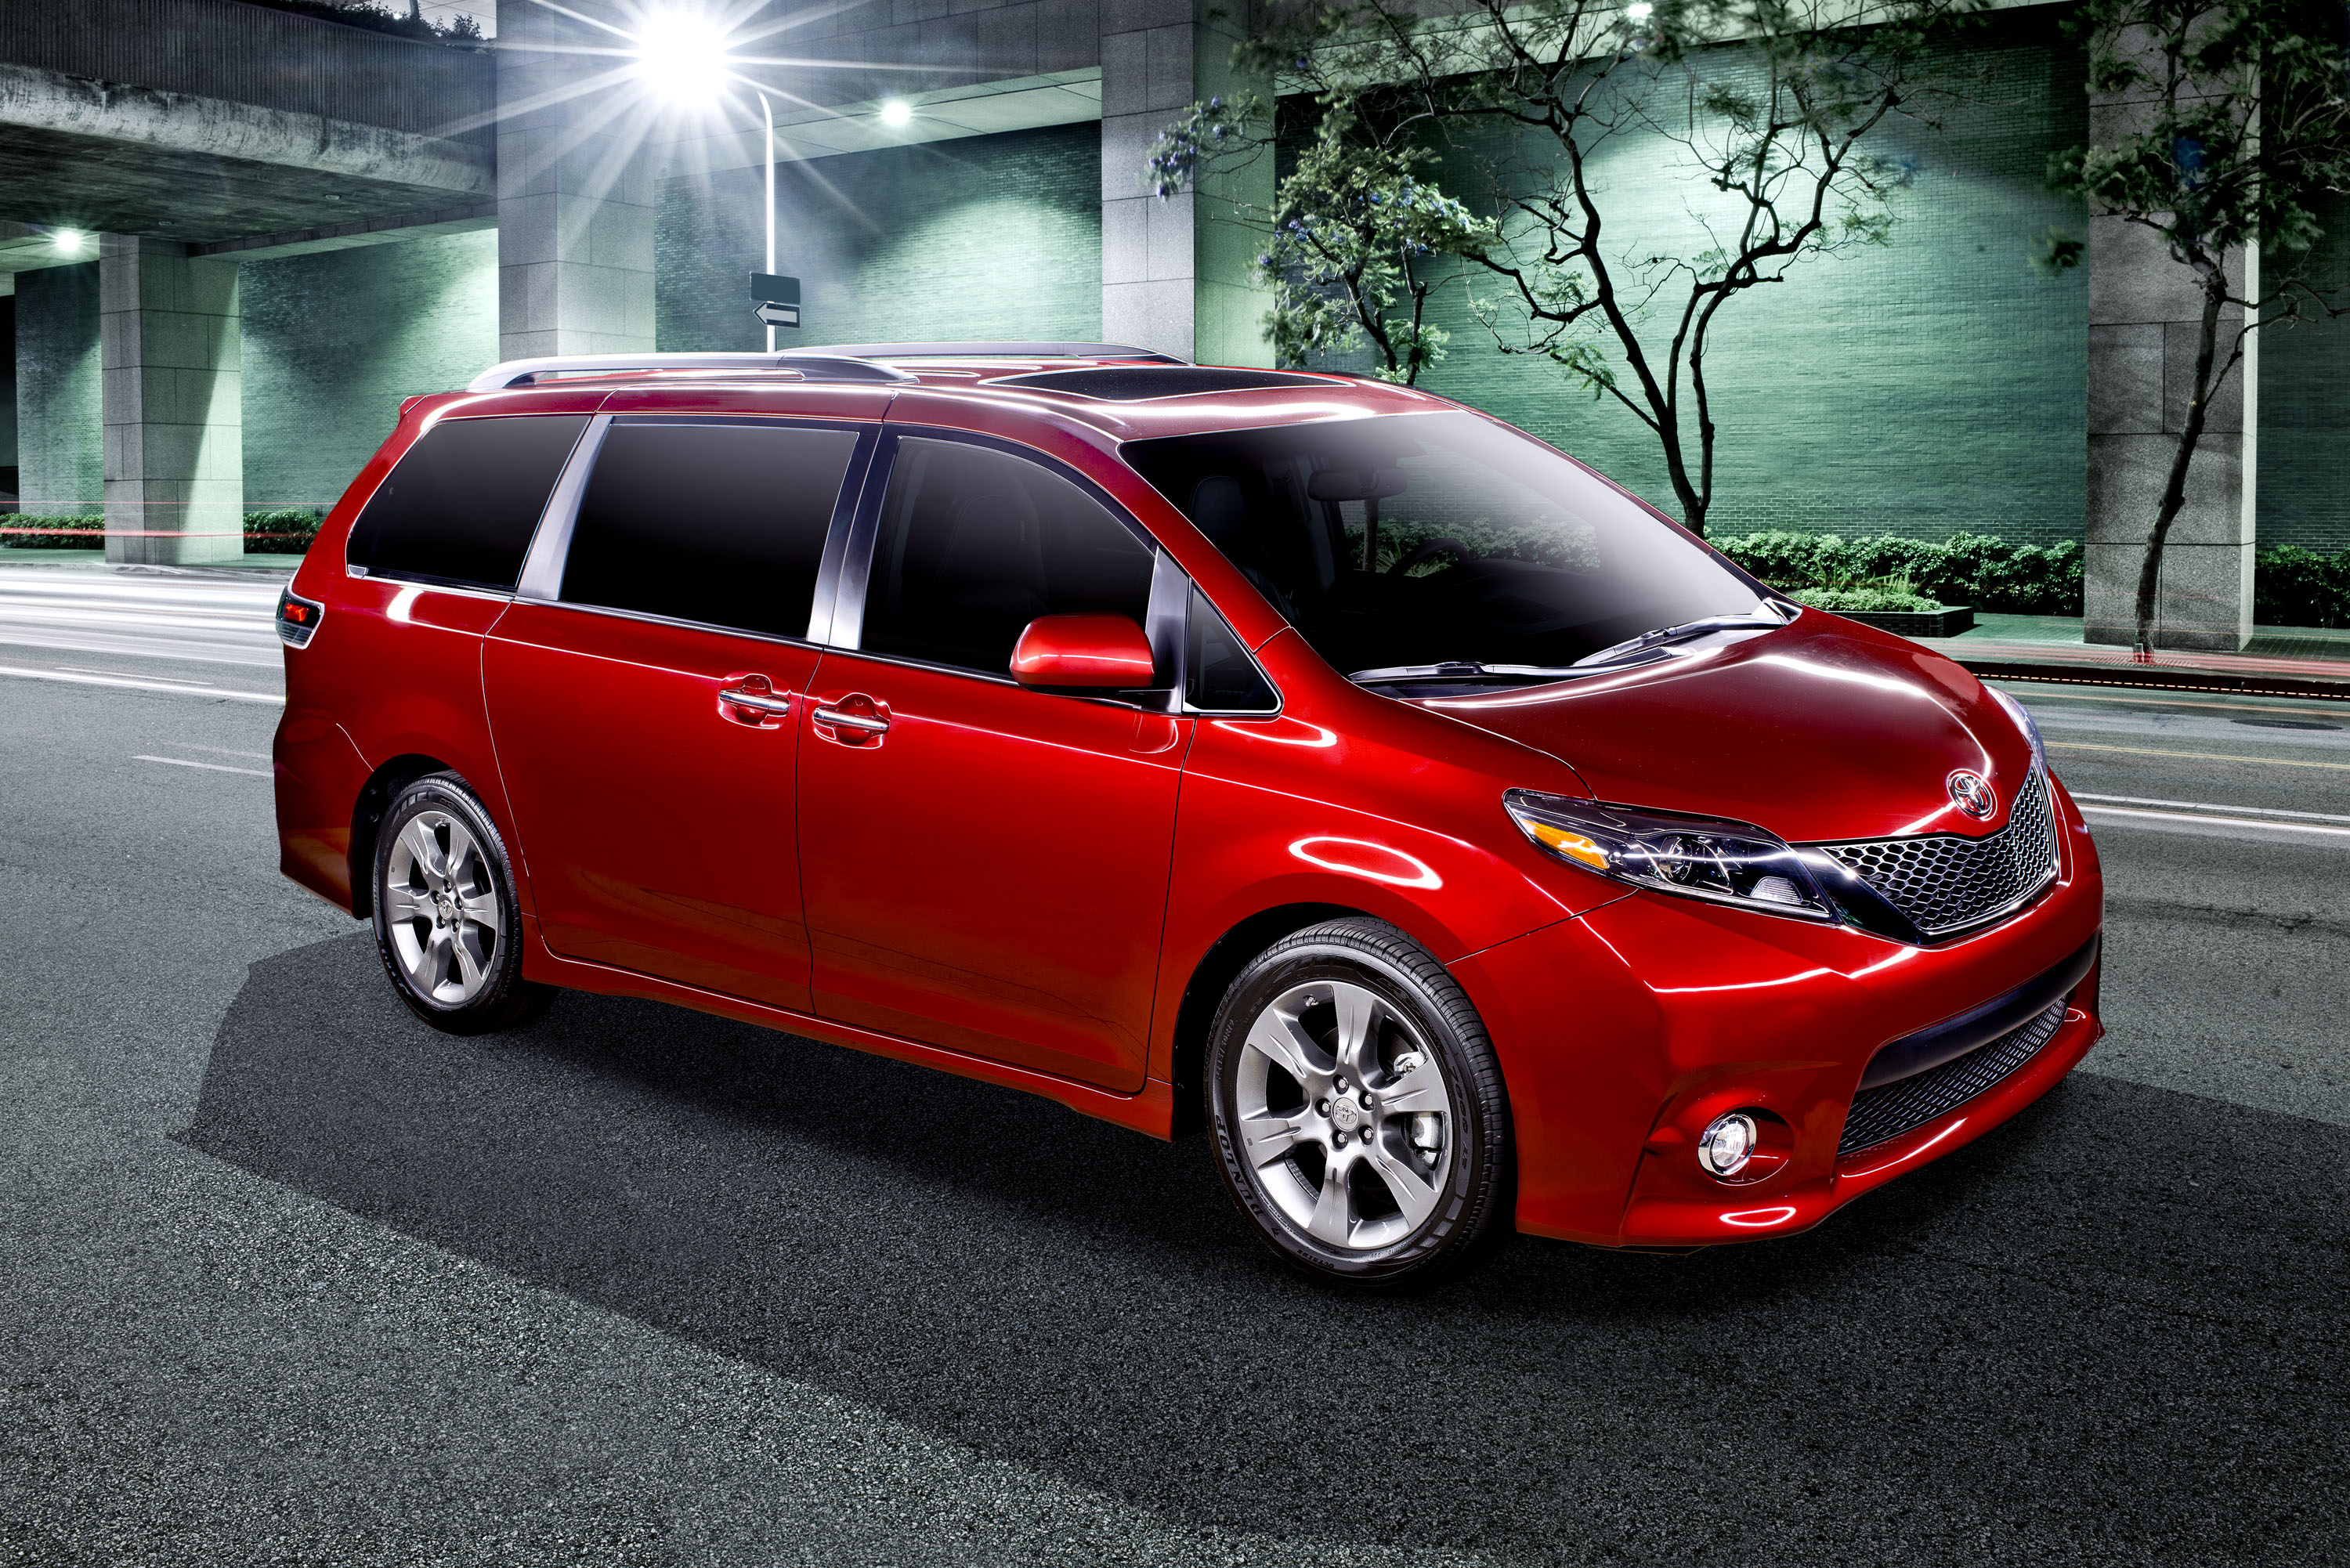 2015 Toyota Sienna gives drivers a built-in megaphone. Kids, you've been warned